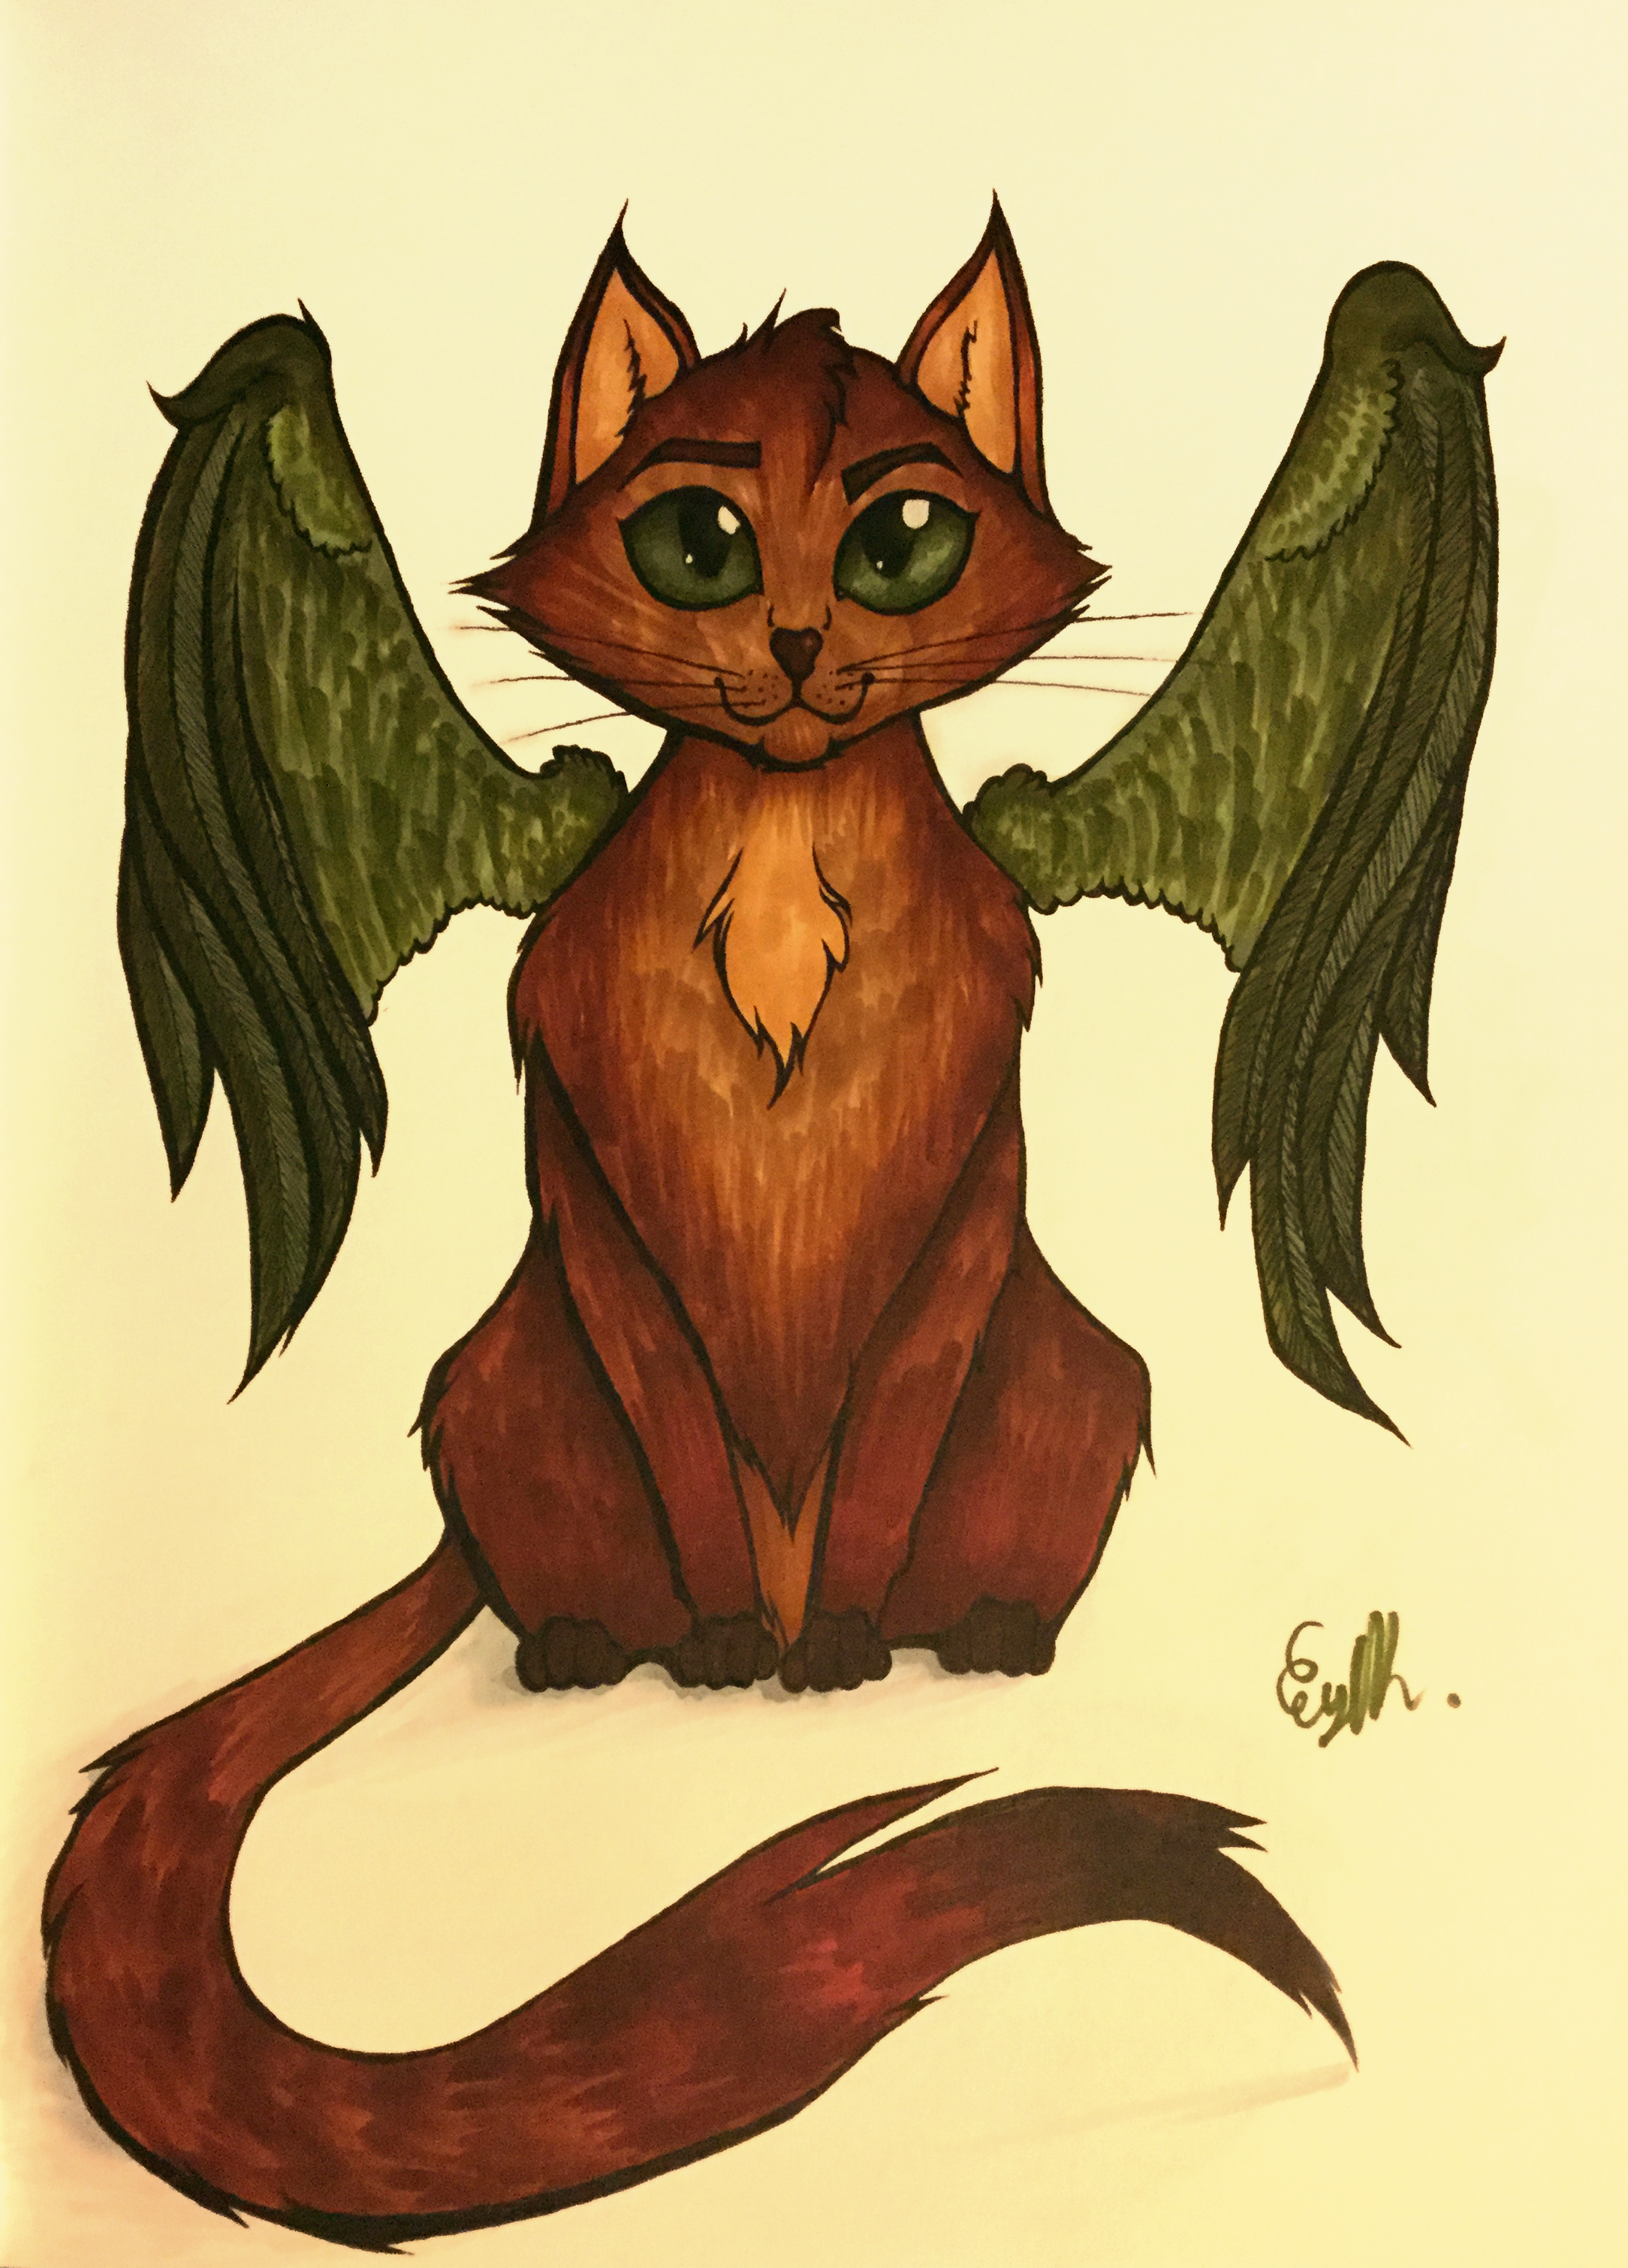 Cat Wings by ViciousCritter on DeviantArt